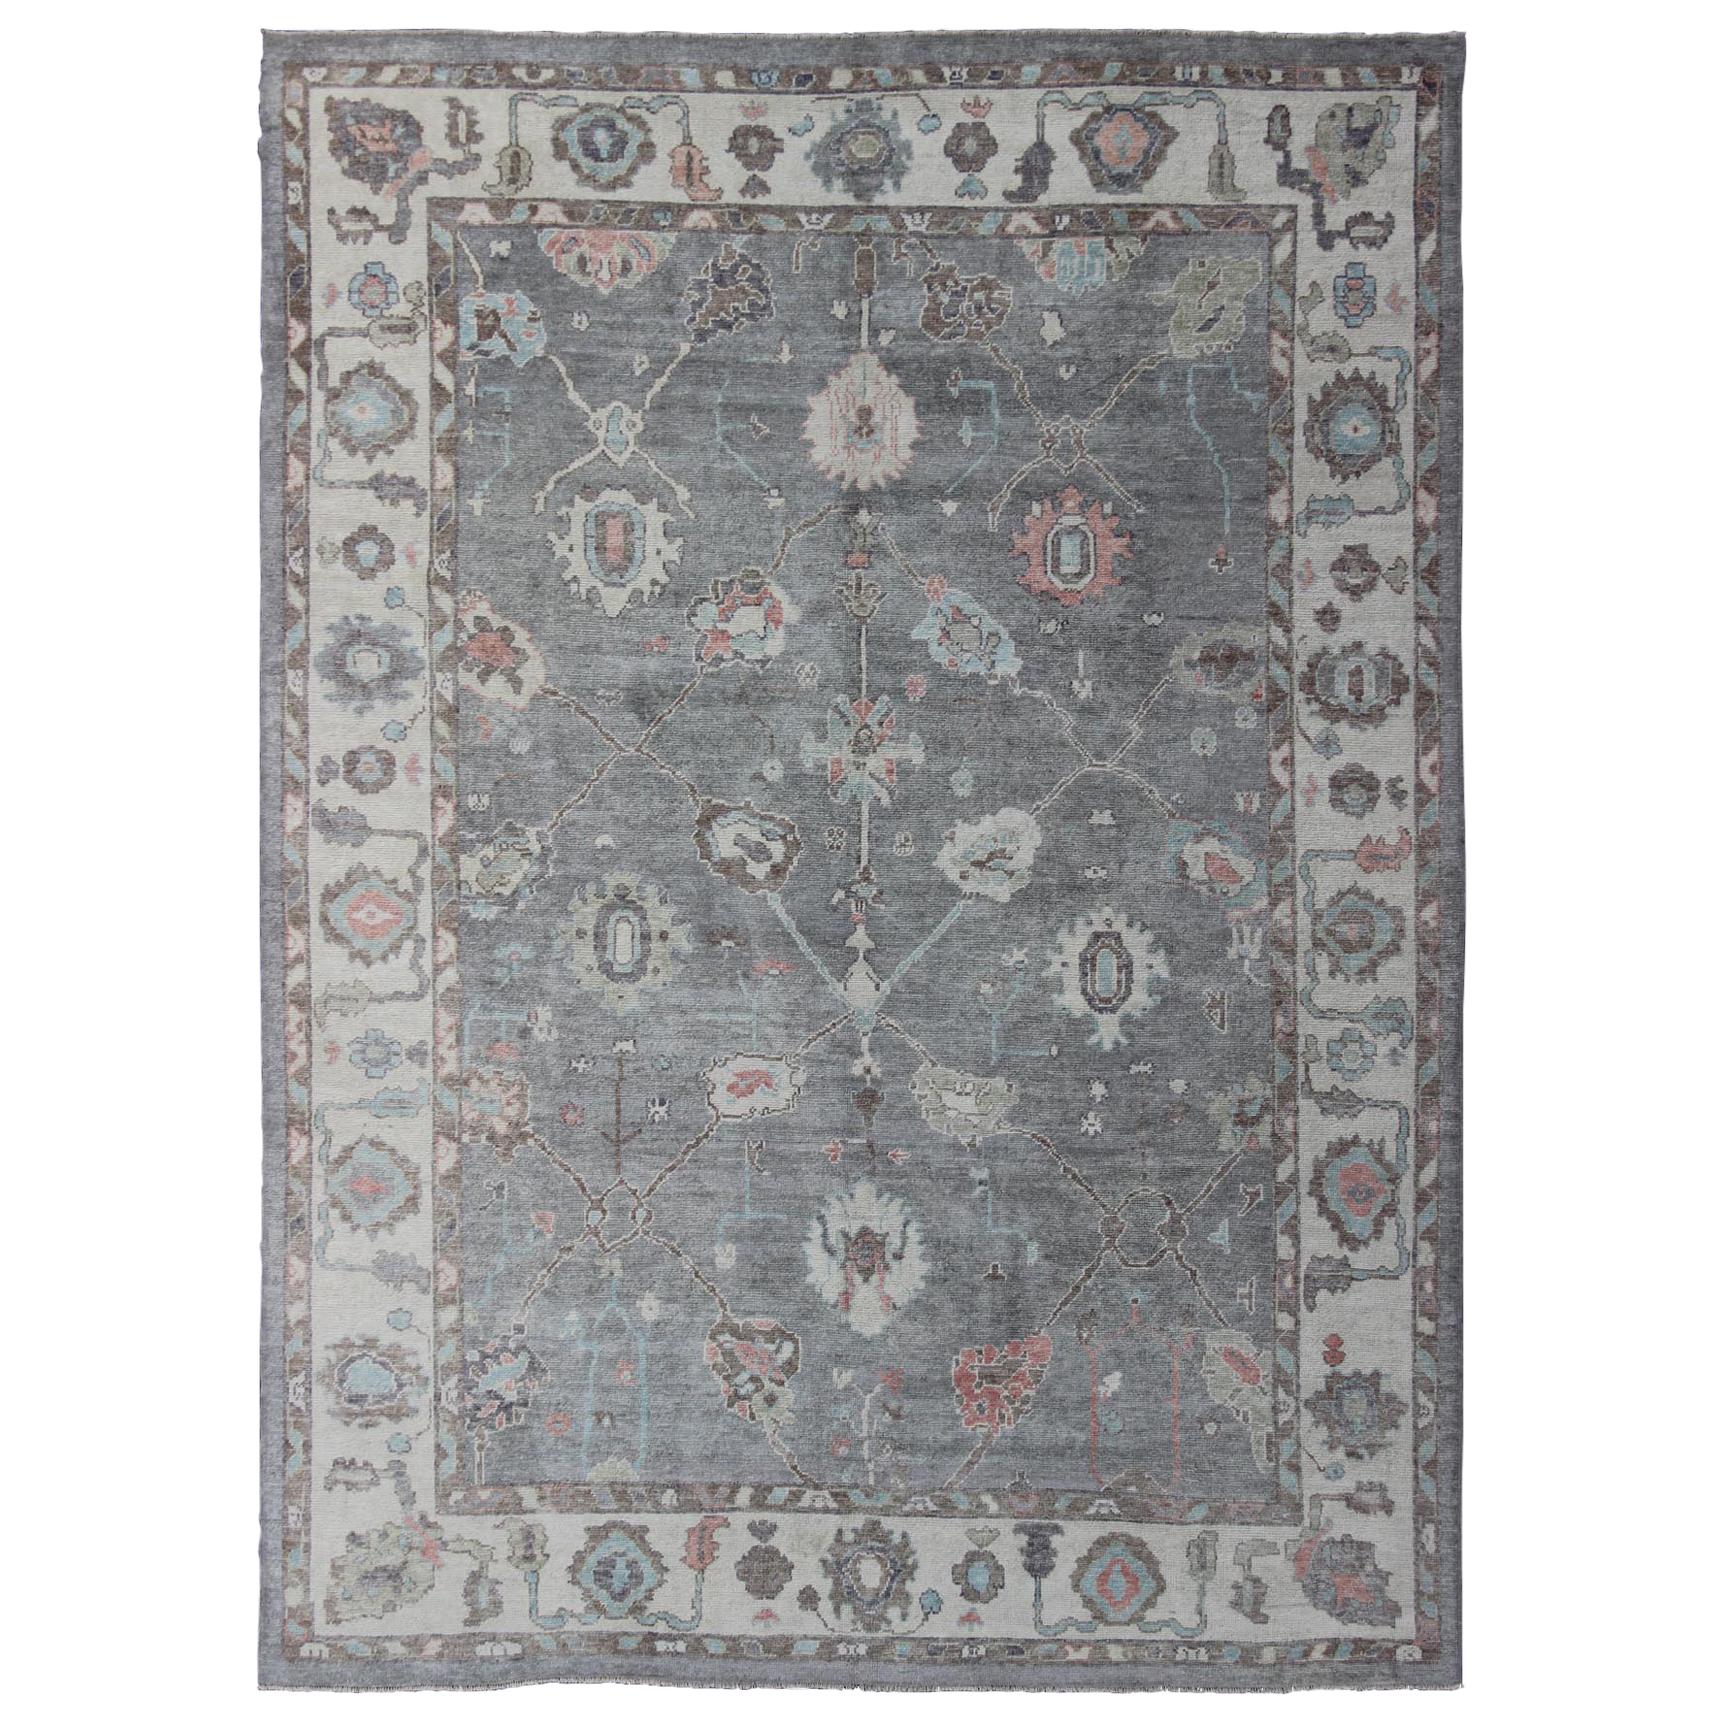 Large Turkish Modern Oushak Rug in Gray, Pink, Neutrals and All-Over Design For Sale